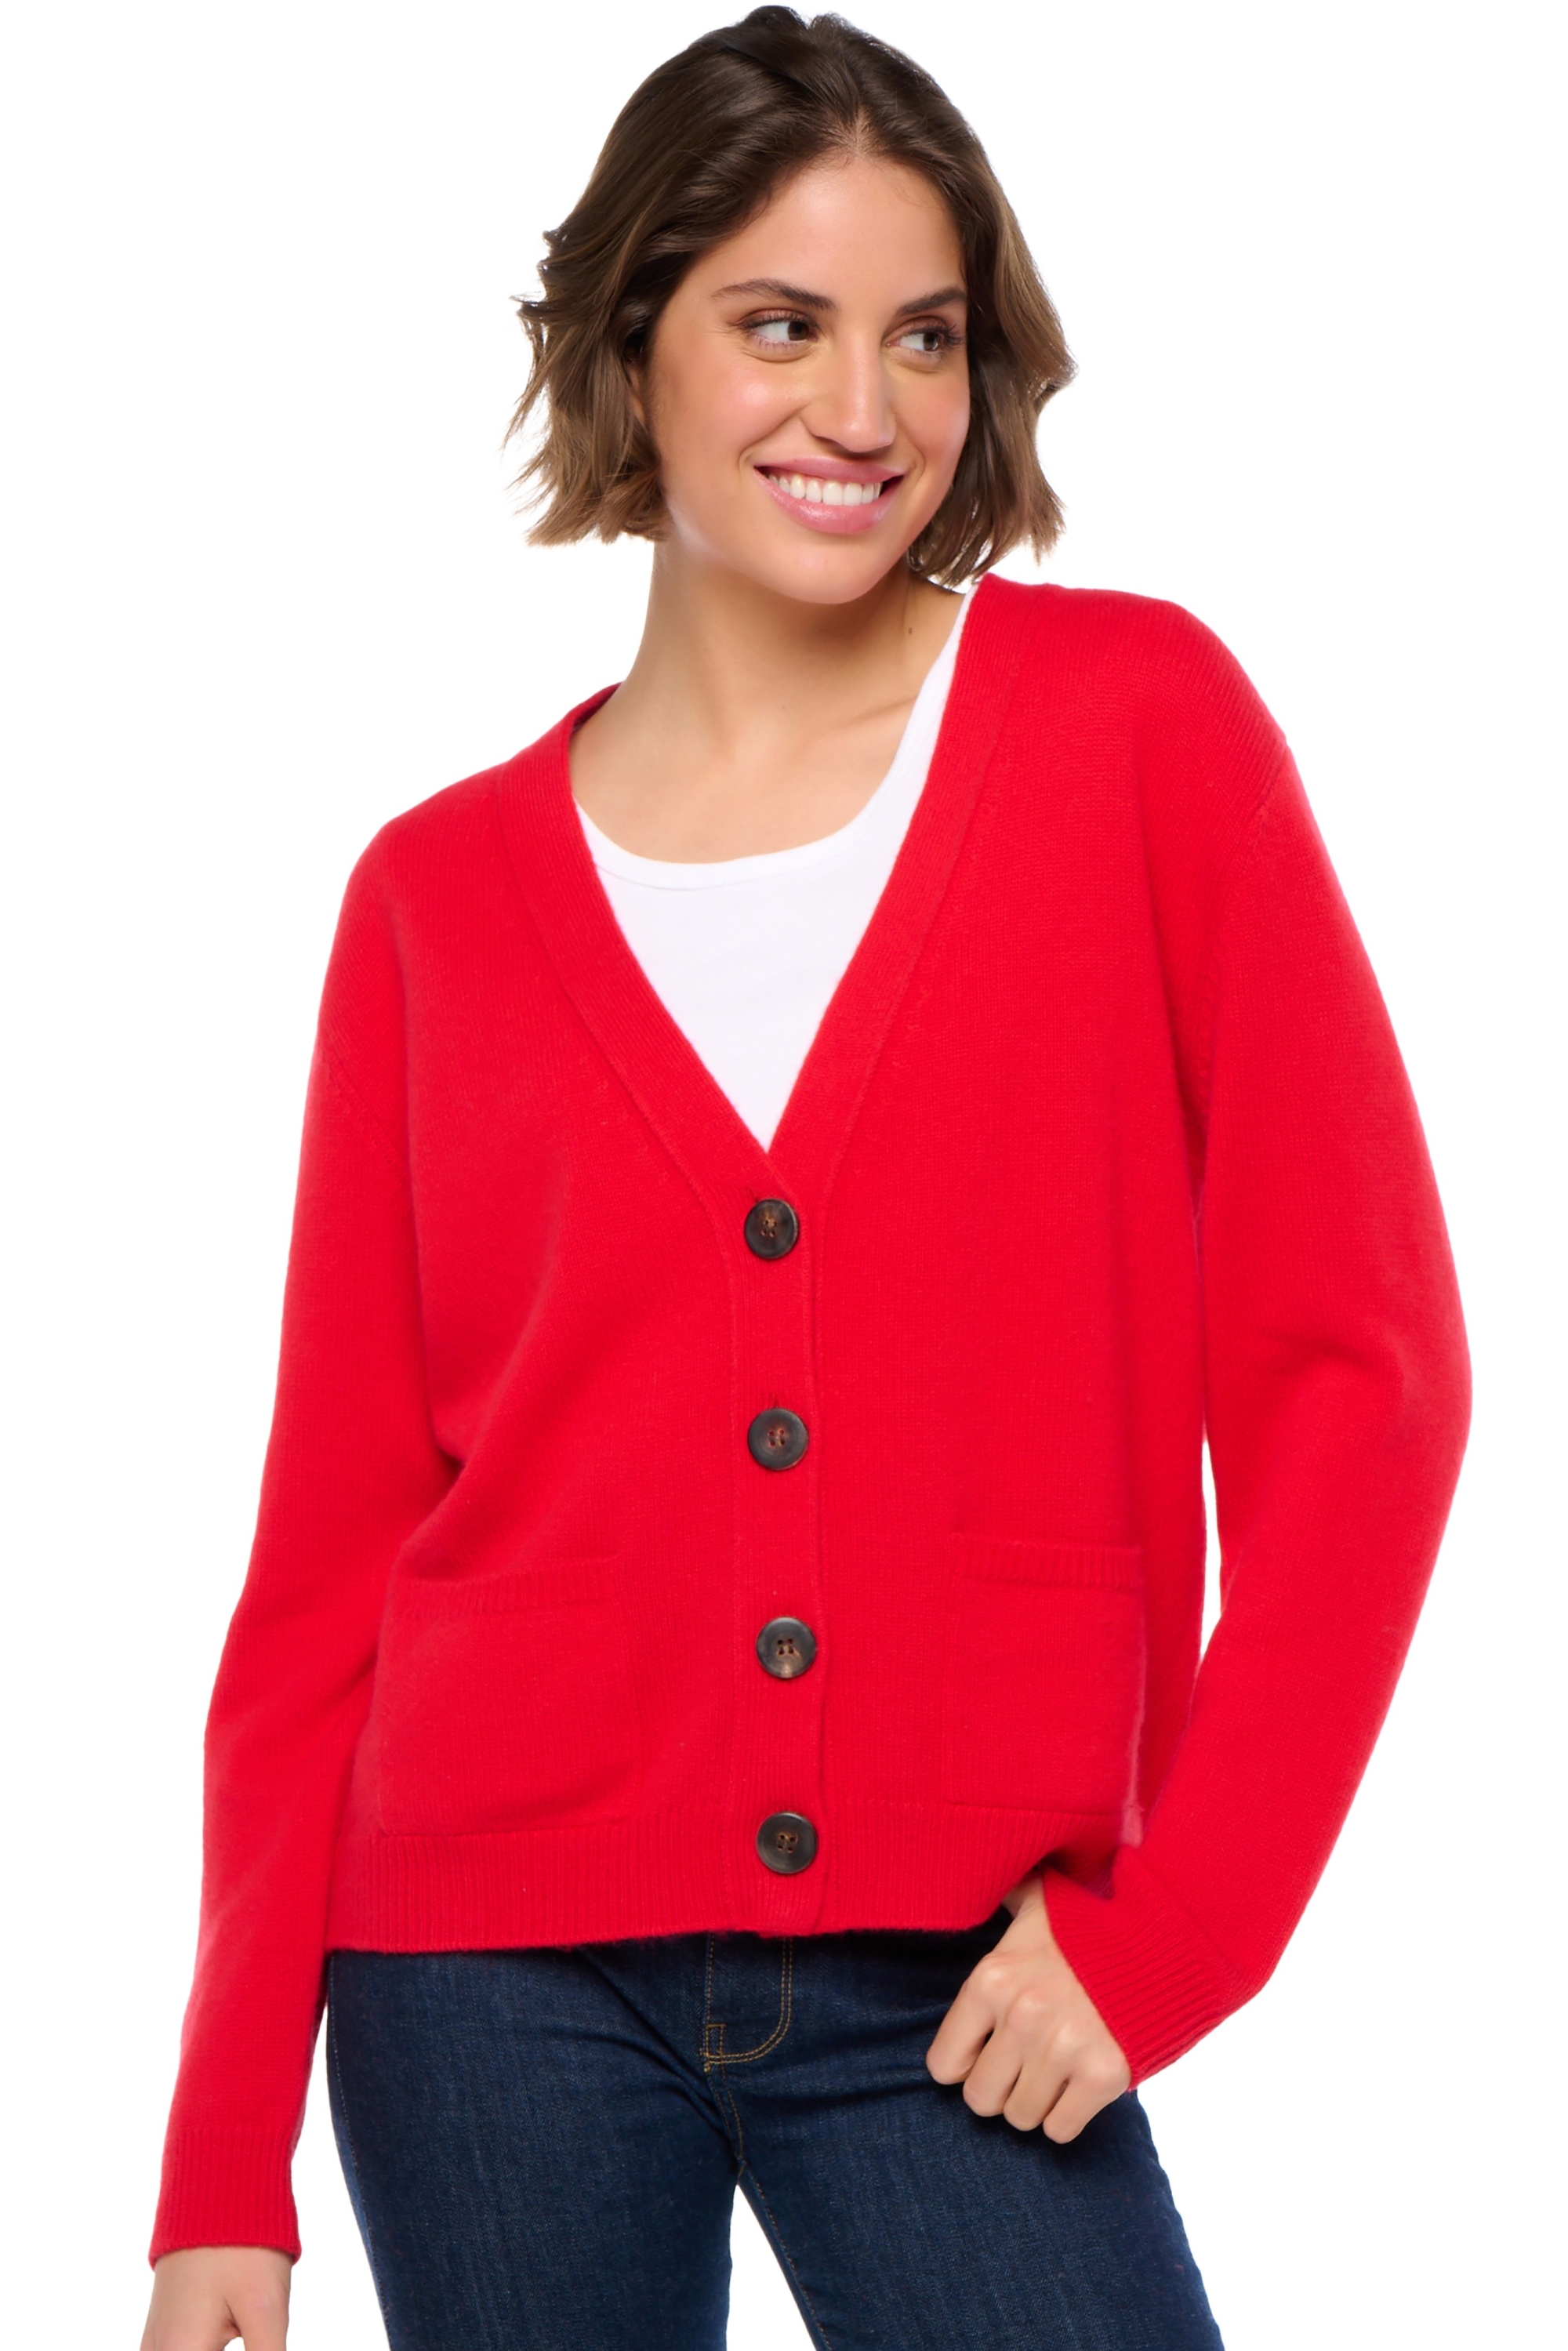 Cachemire pull femme tanzania rouge 3xl